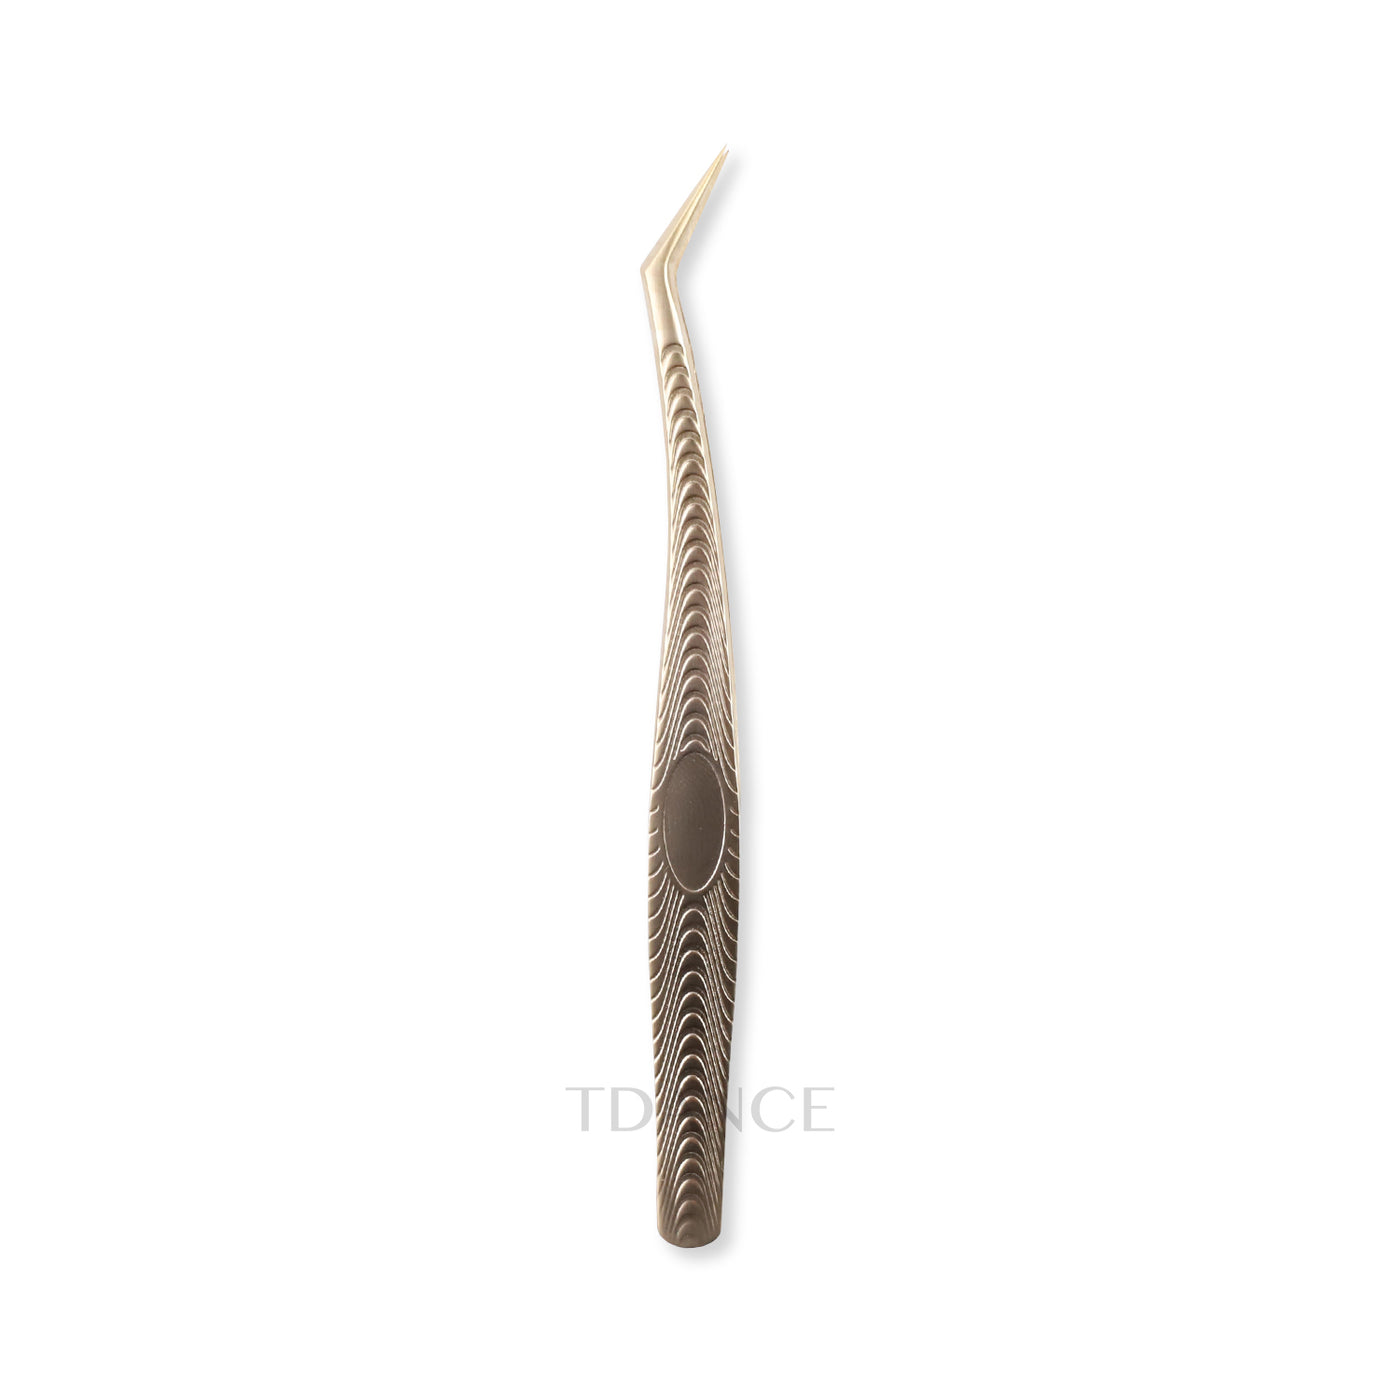 TF-04 Fish Scale Gold Tweezers For Eyelash Extension